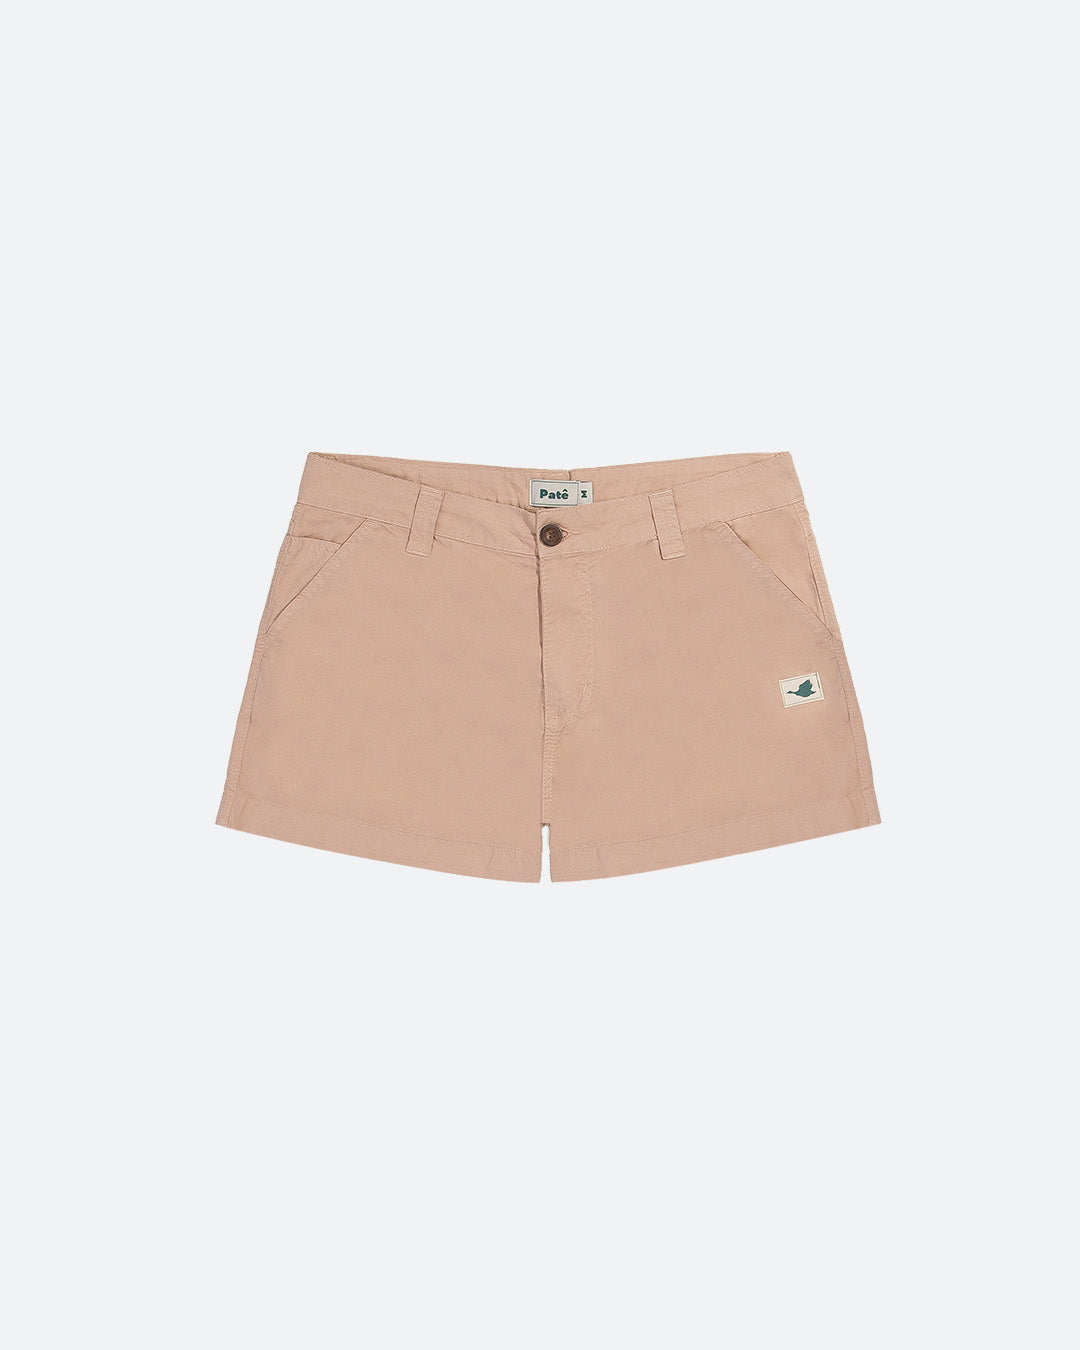 Scout Shorts